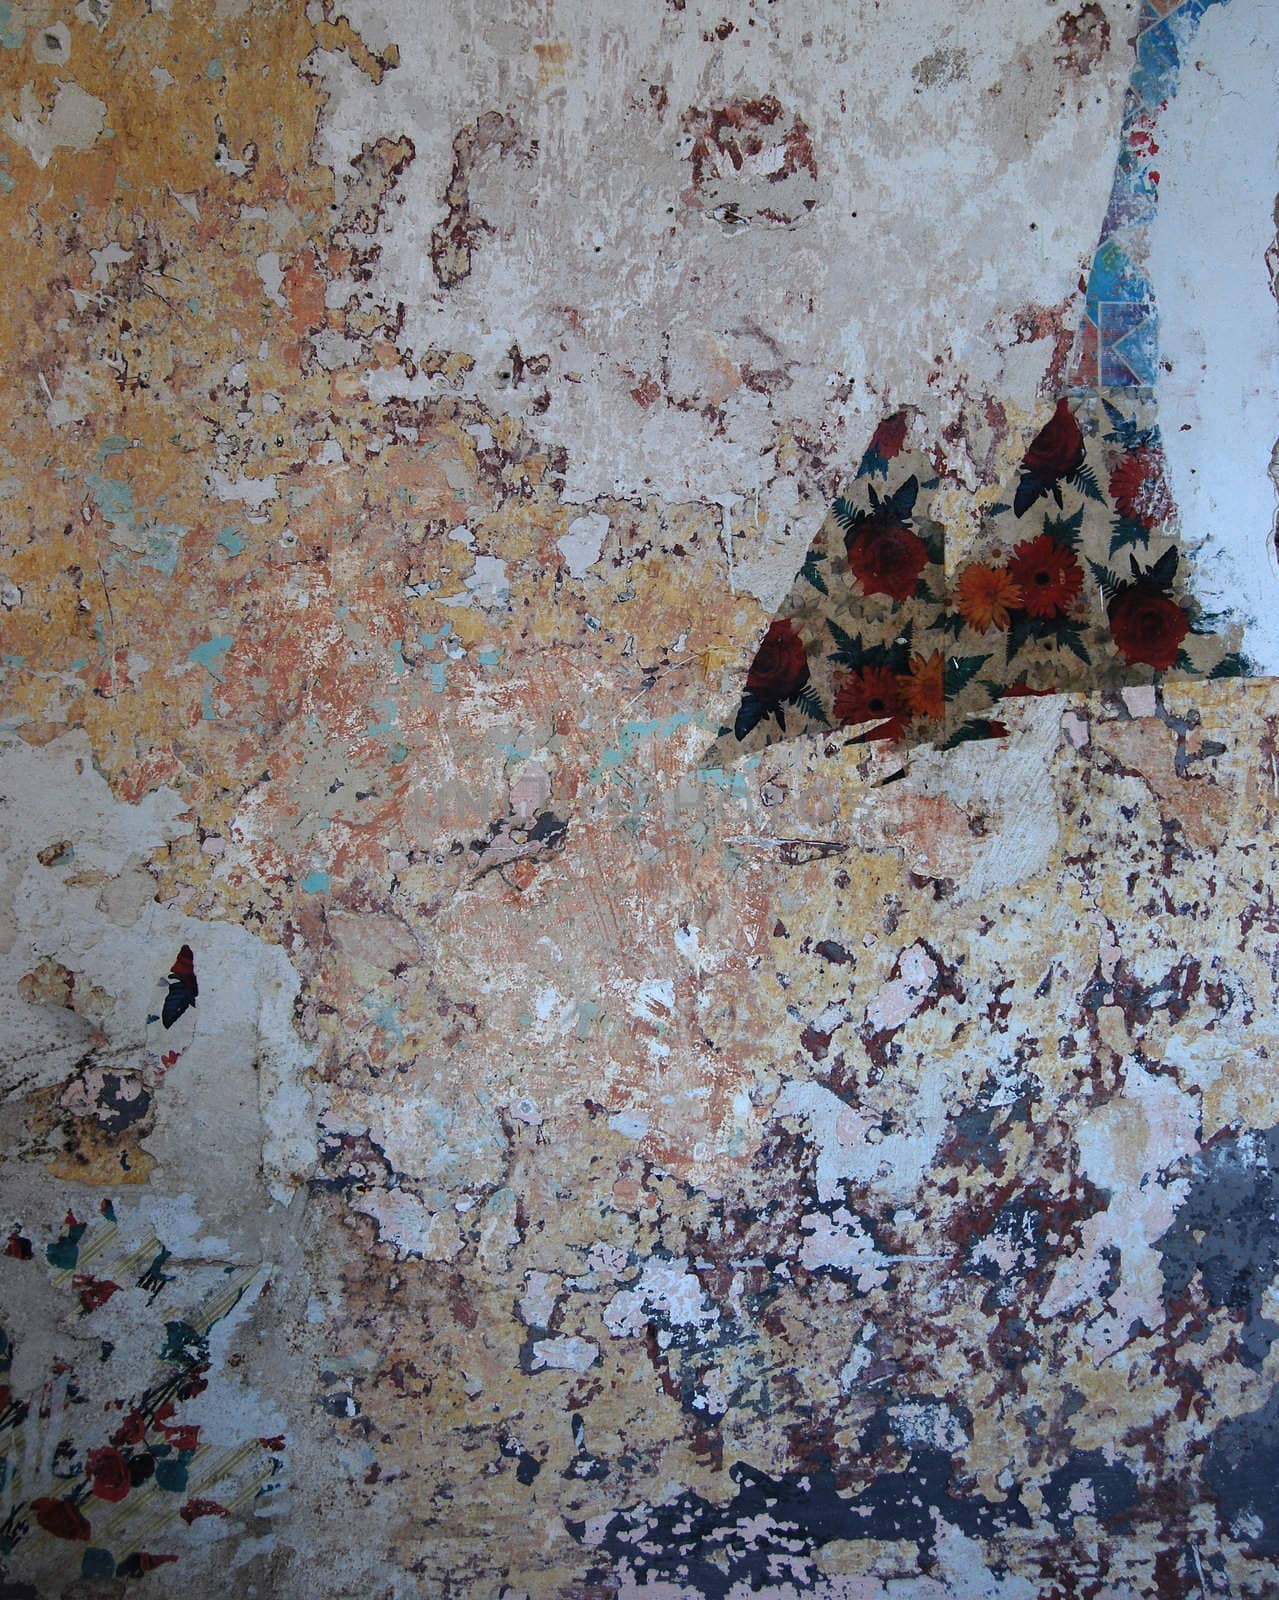 Grungy room wall with old coats of paint and wallpaper